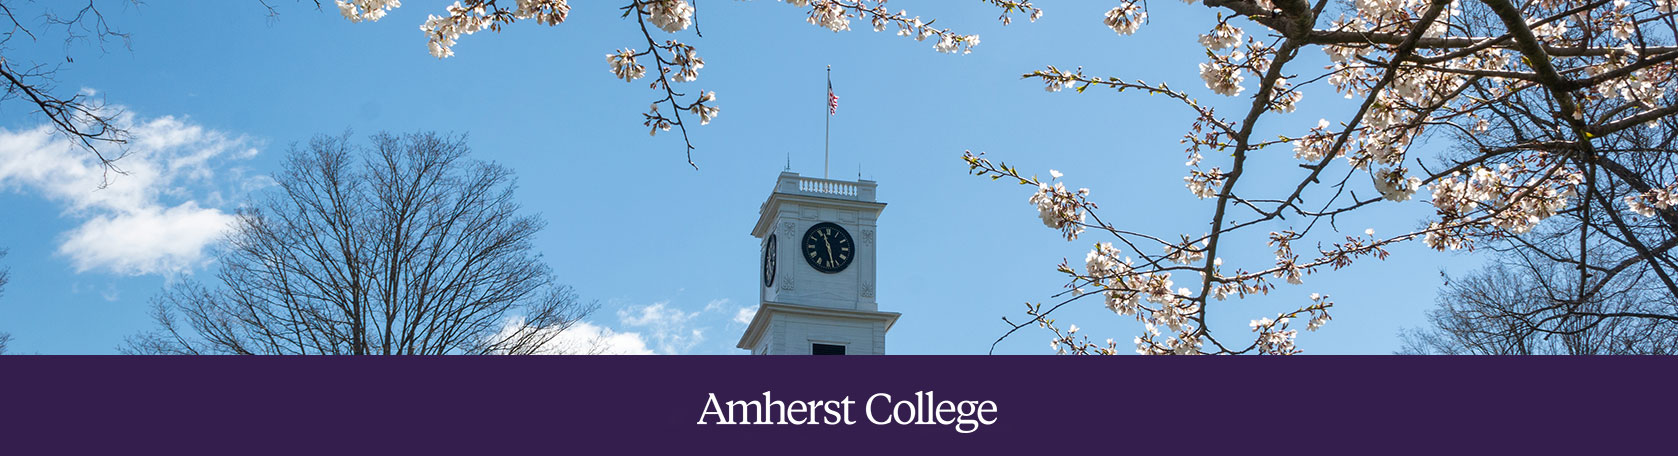 Sheree Ohen joins Amherst College as Chief Equity and Inclusion Officer